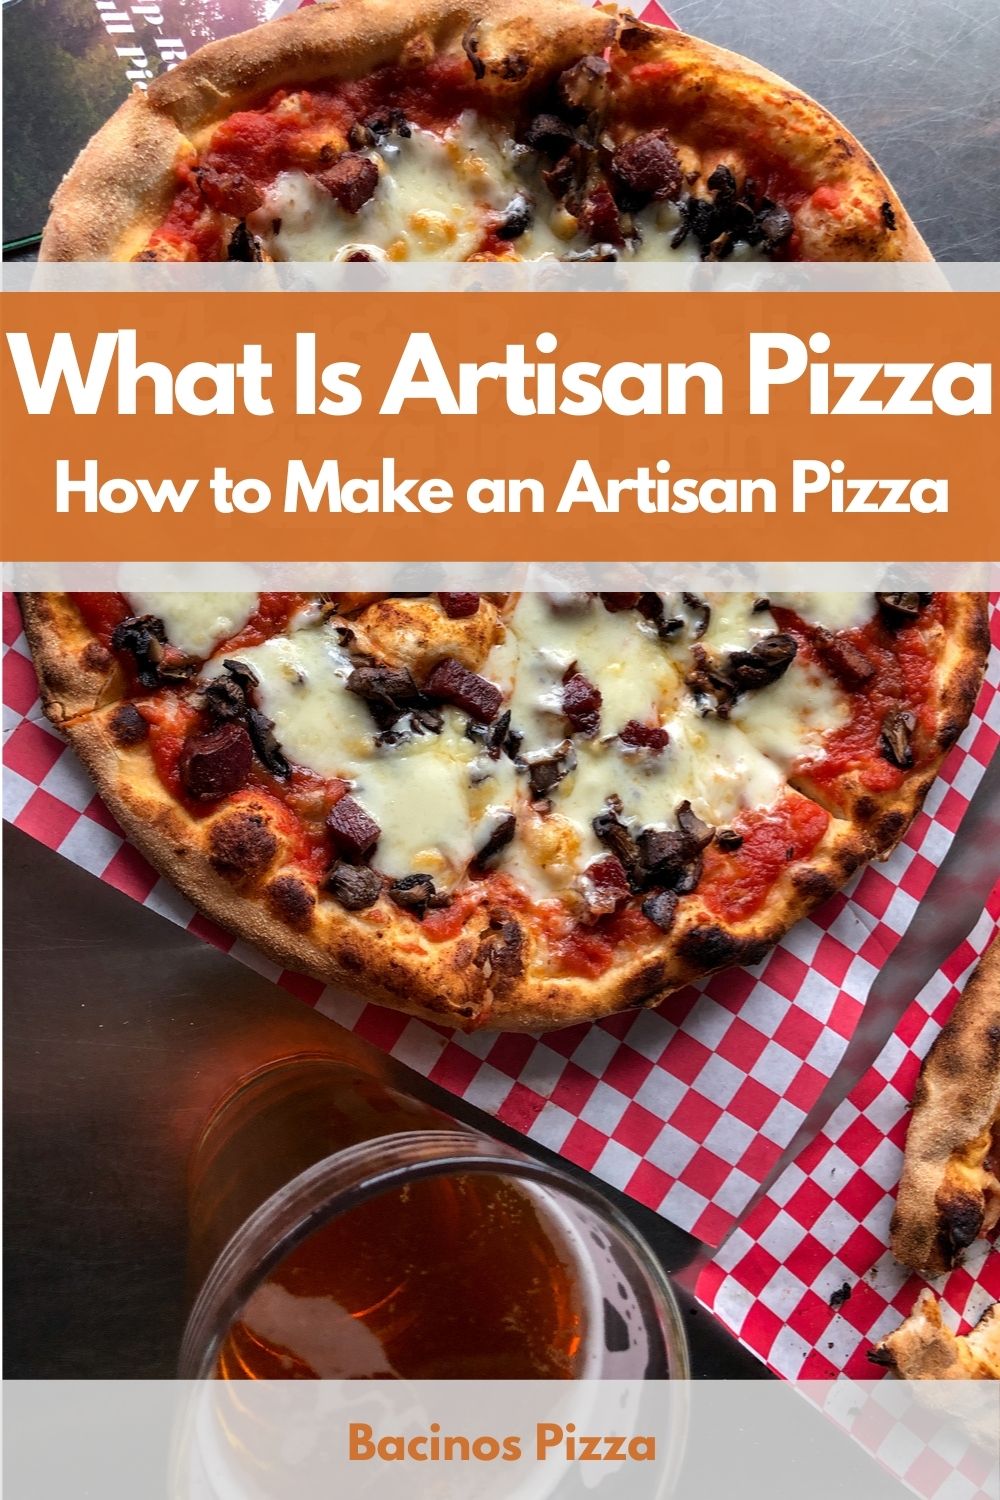 What Is Artisan Pizza How to Make an Artisan Pizza pin 2